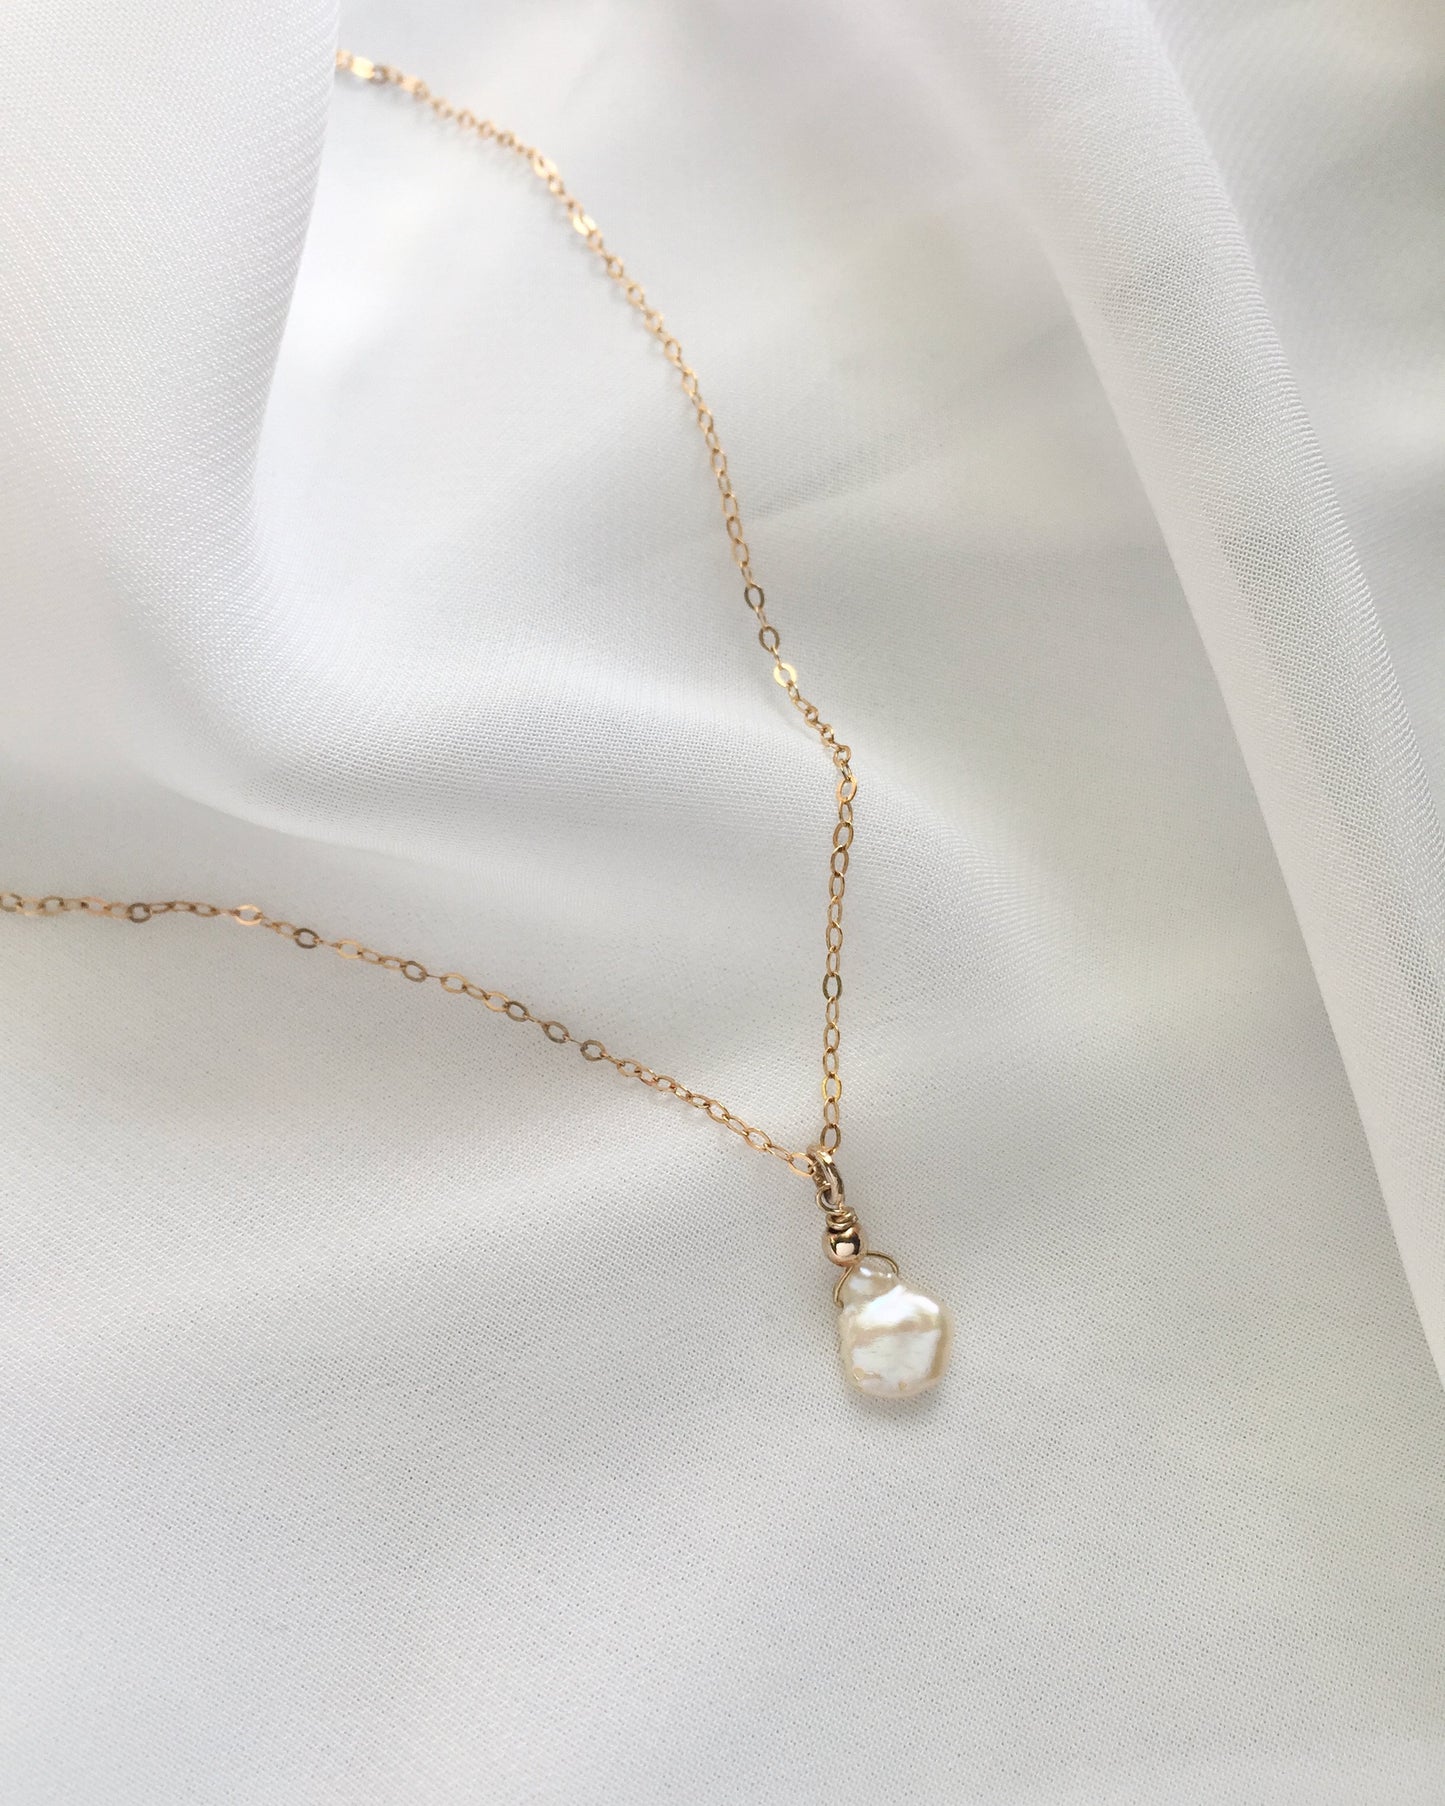 90th Birthday Necklace | 90th Birthday Jewelry For Mom Grandma or Aunt | Delicate Pearl Necklace In Gold Filled or Sterling Silver | IB Jewelry